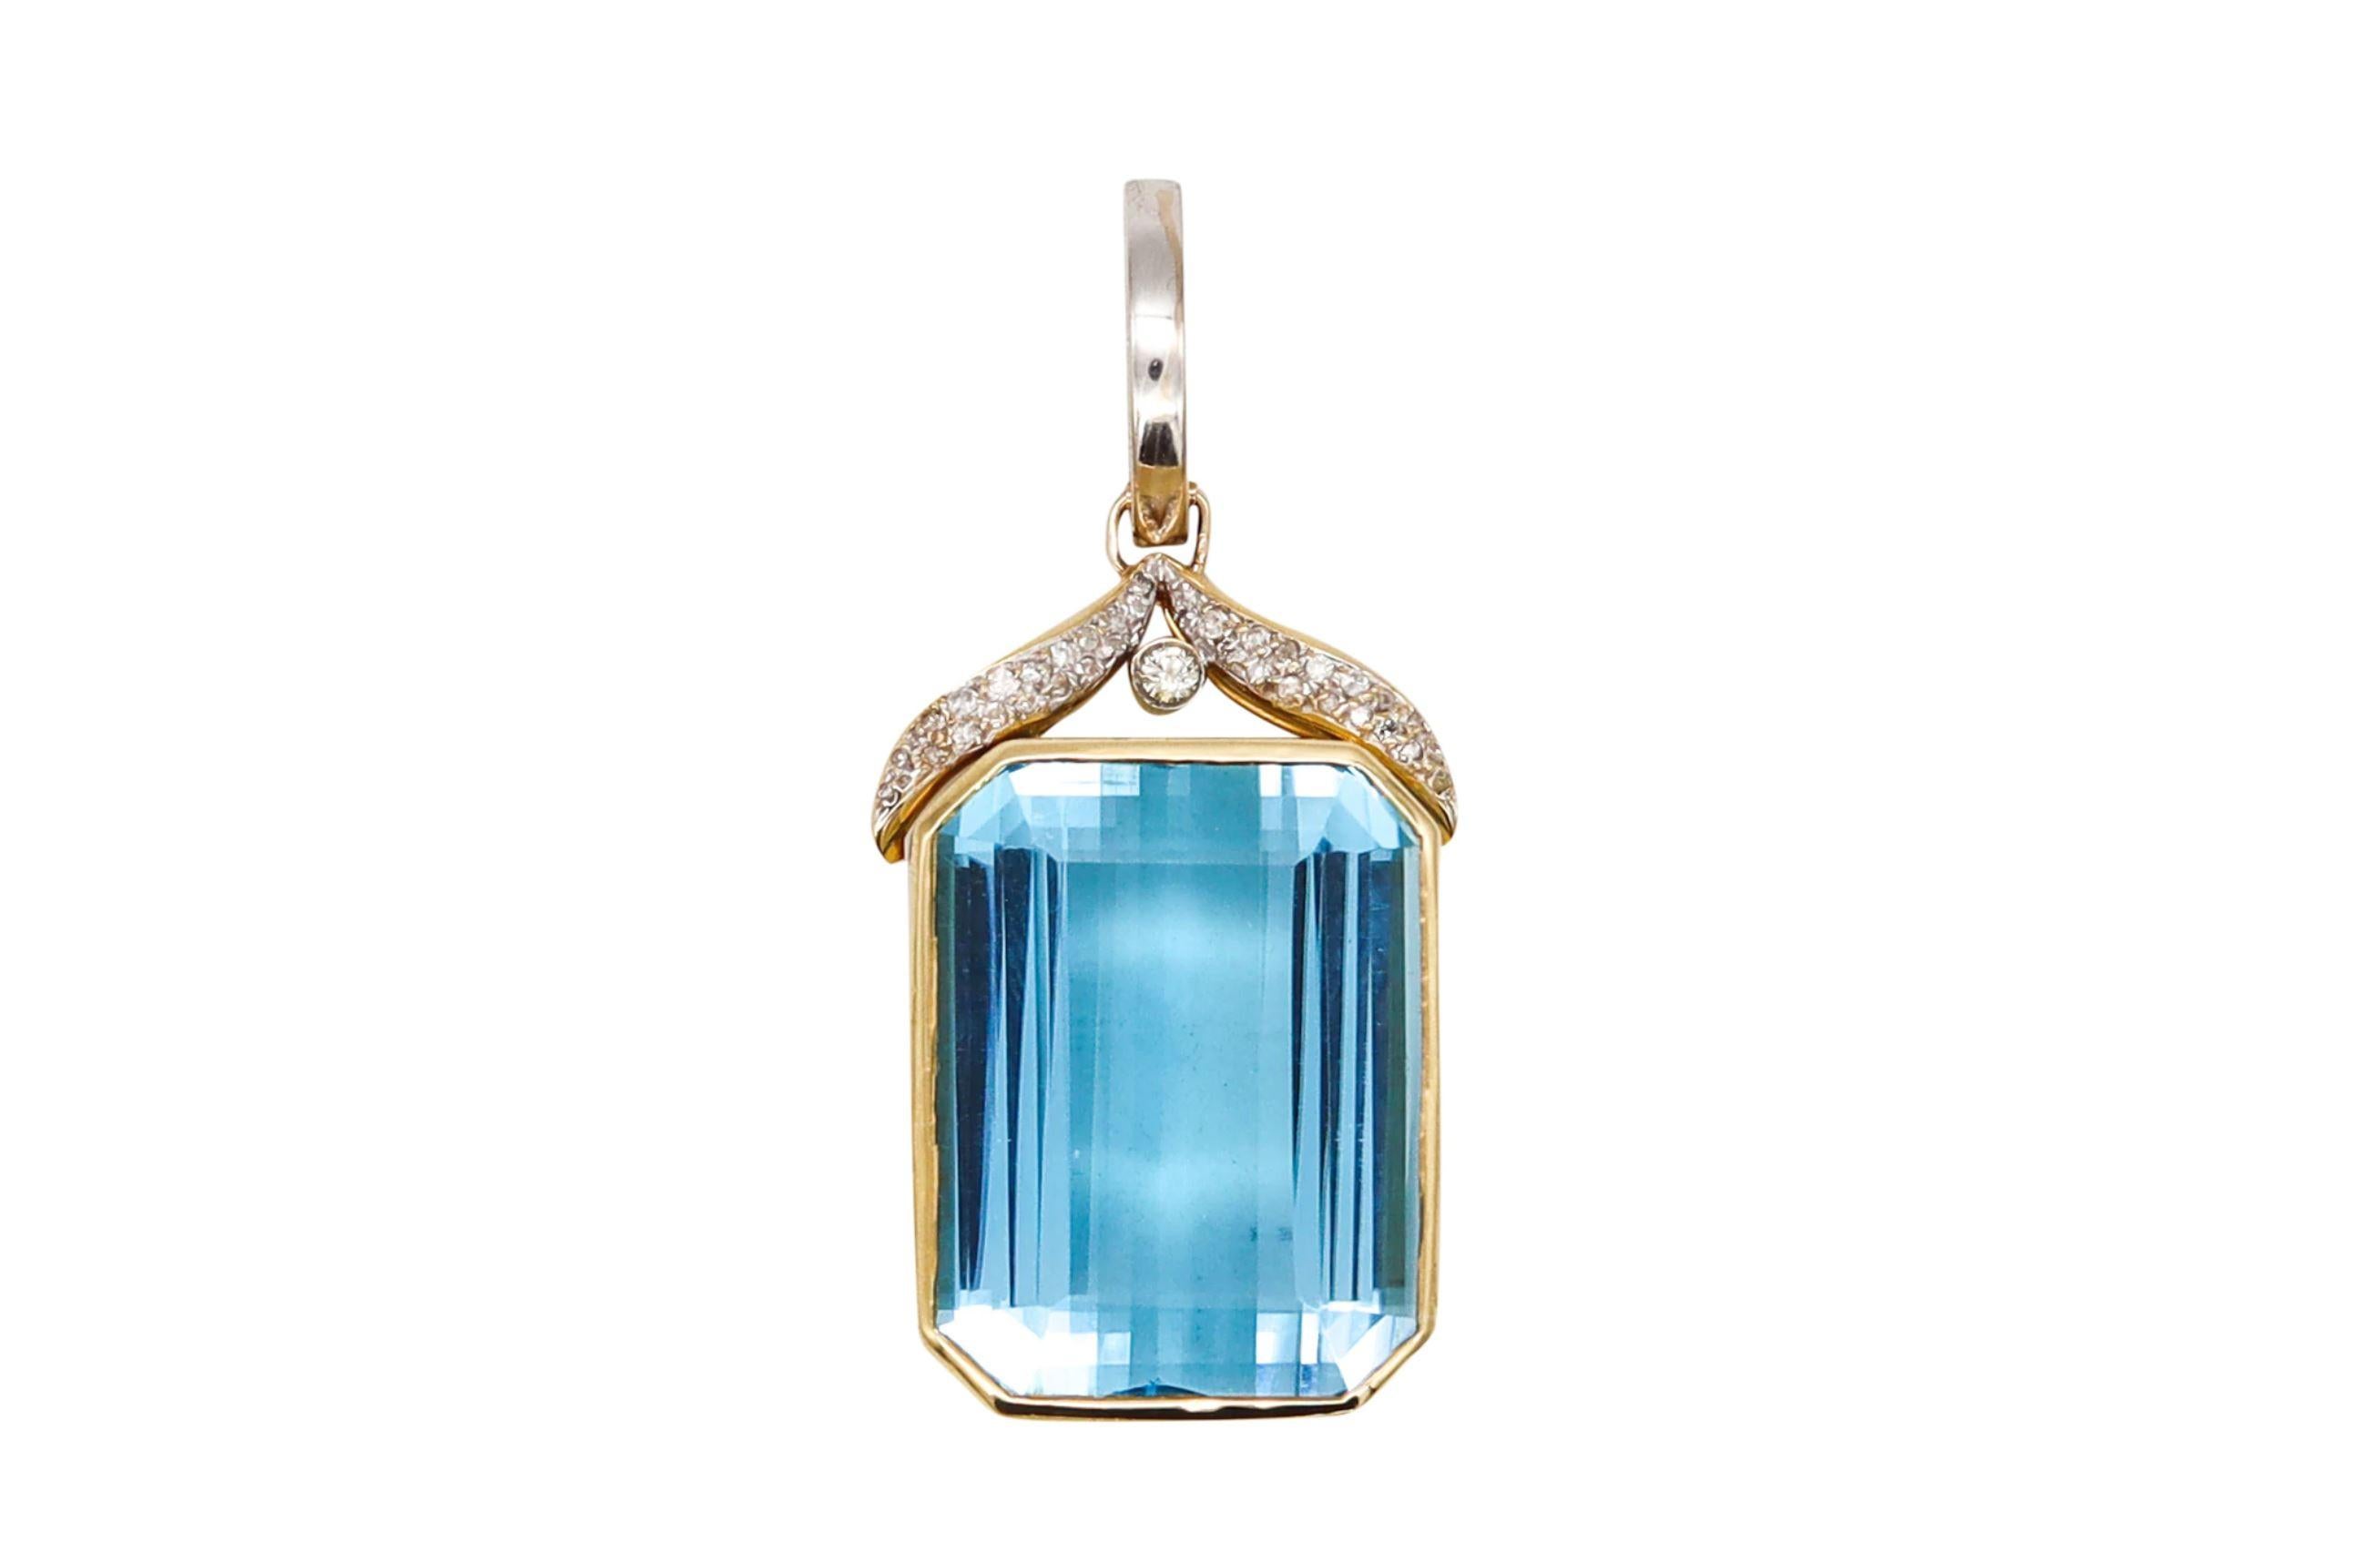 Contemporary Large Pendant in 18Kt Gold with 72.06 Ctw in Aquamarine & Diamonds